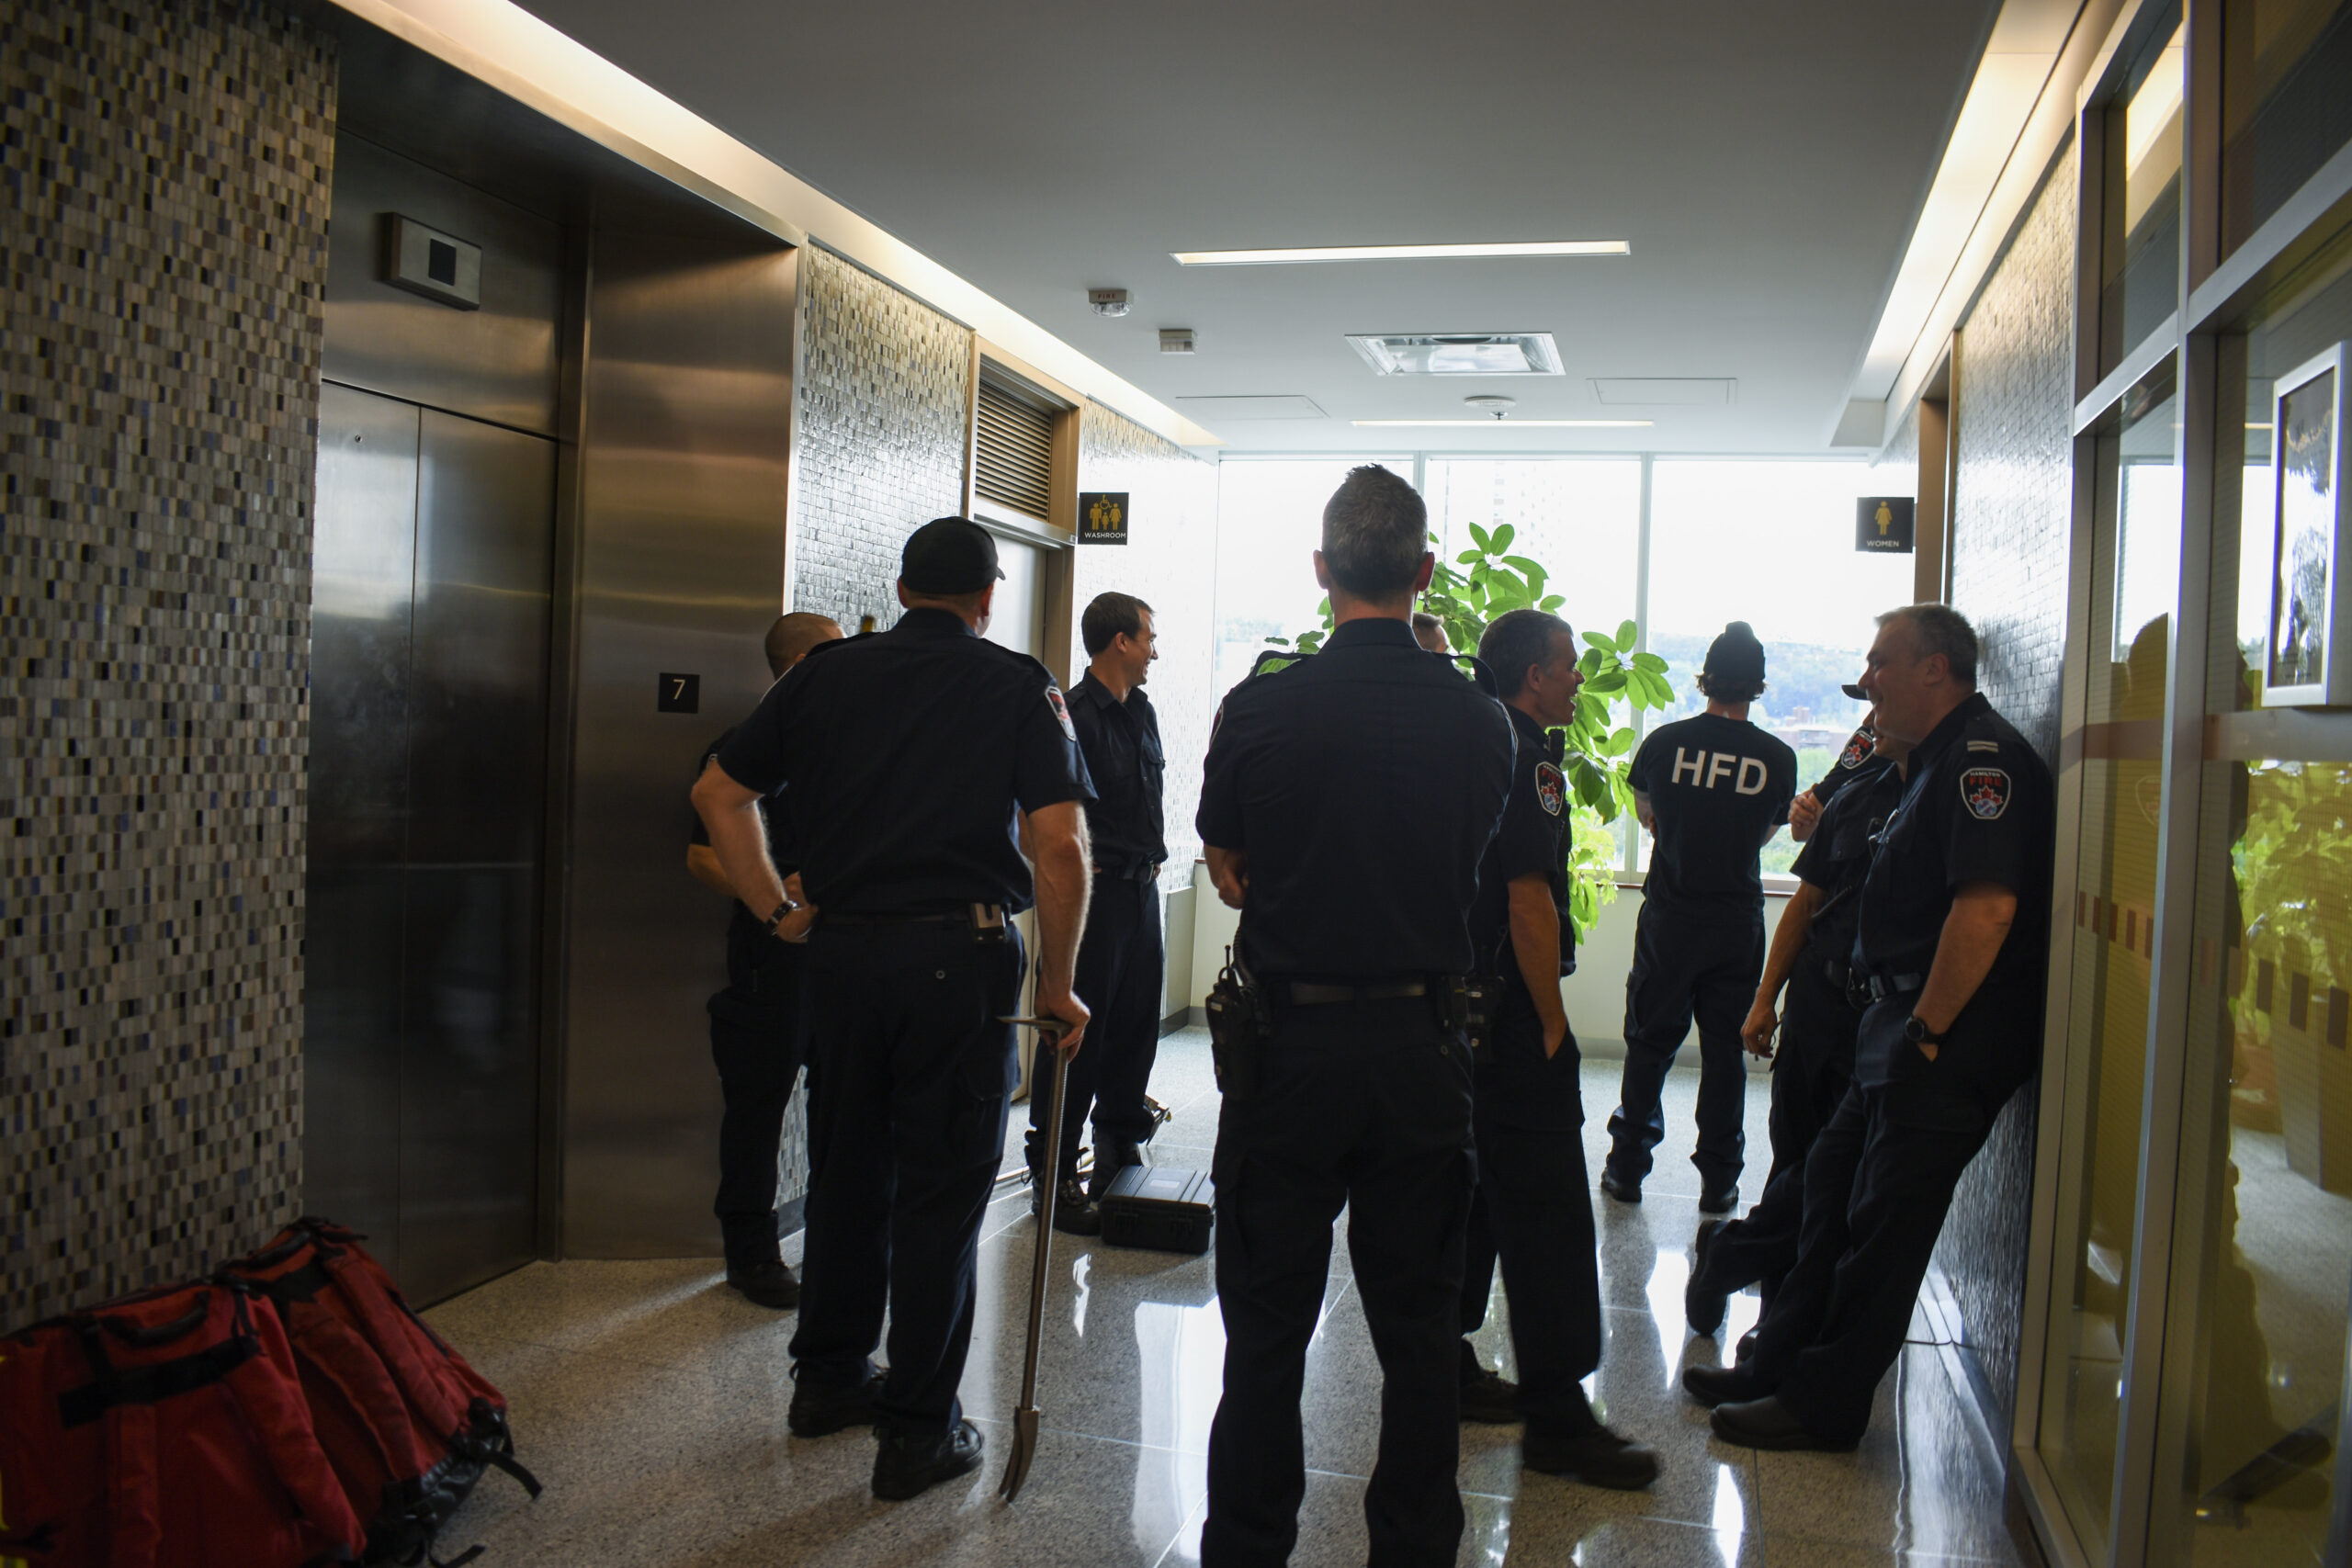 Hamilton firefighters standing in a lobby awaiting an elevator mechanic to rescue a person trapped inside a stalled elevator